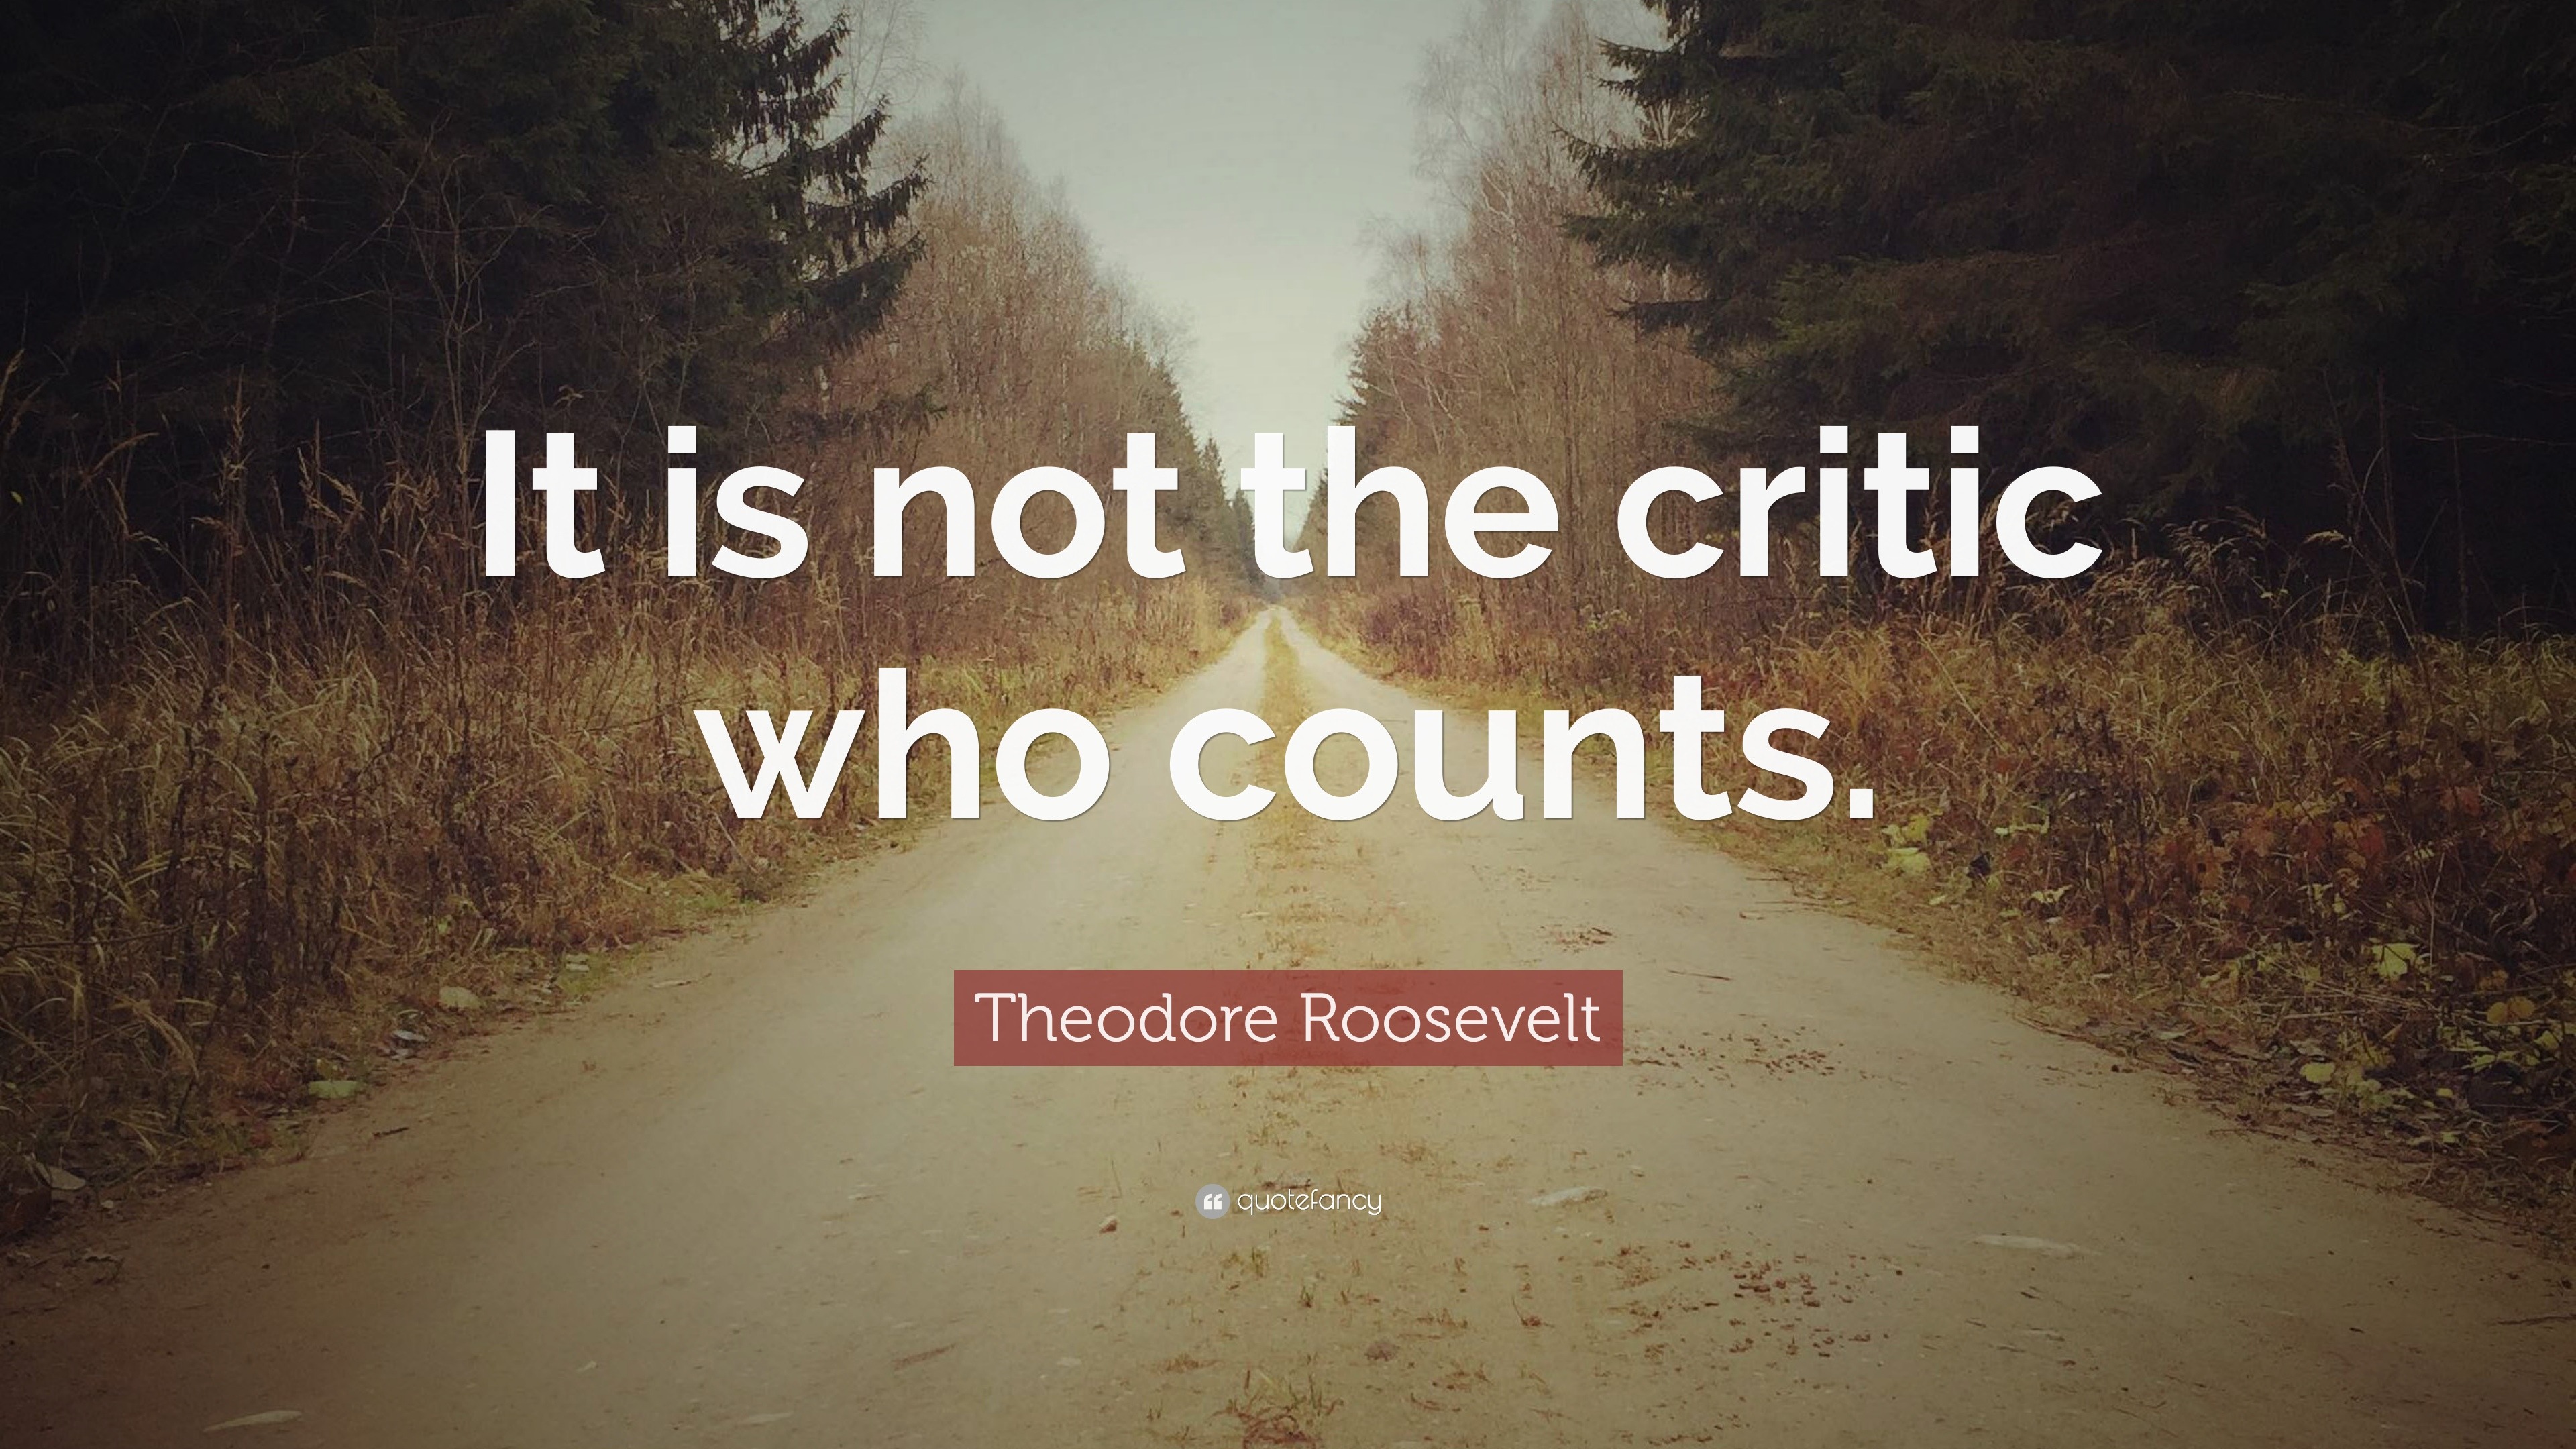 "It is not the critic who counts..." Theodore Roosevelt